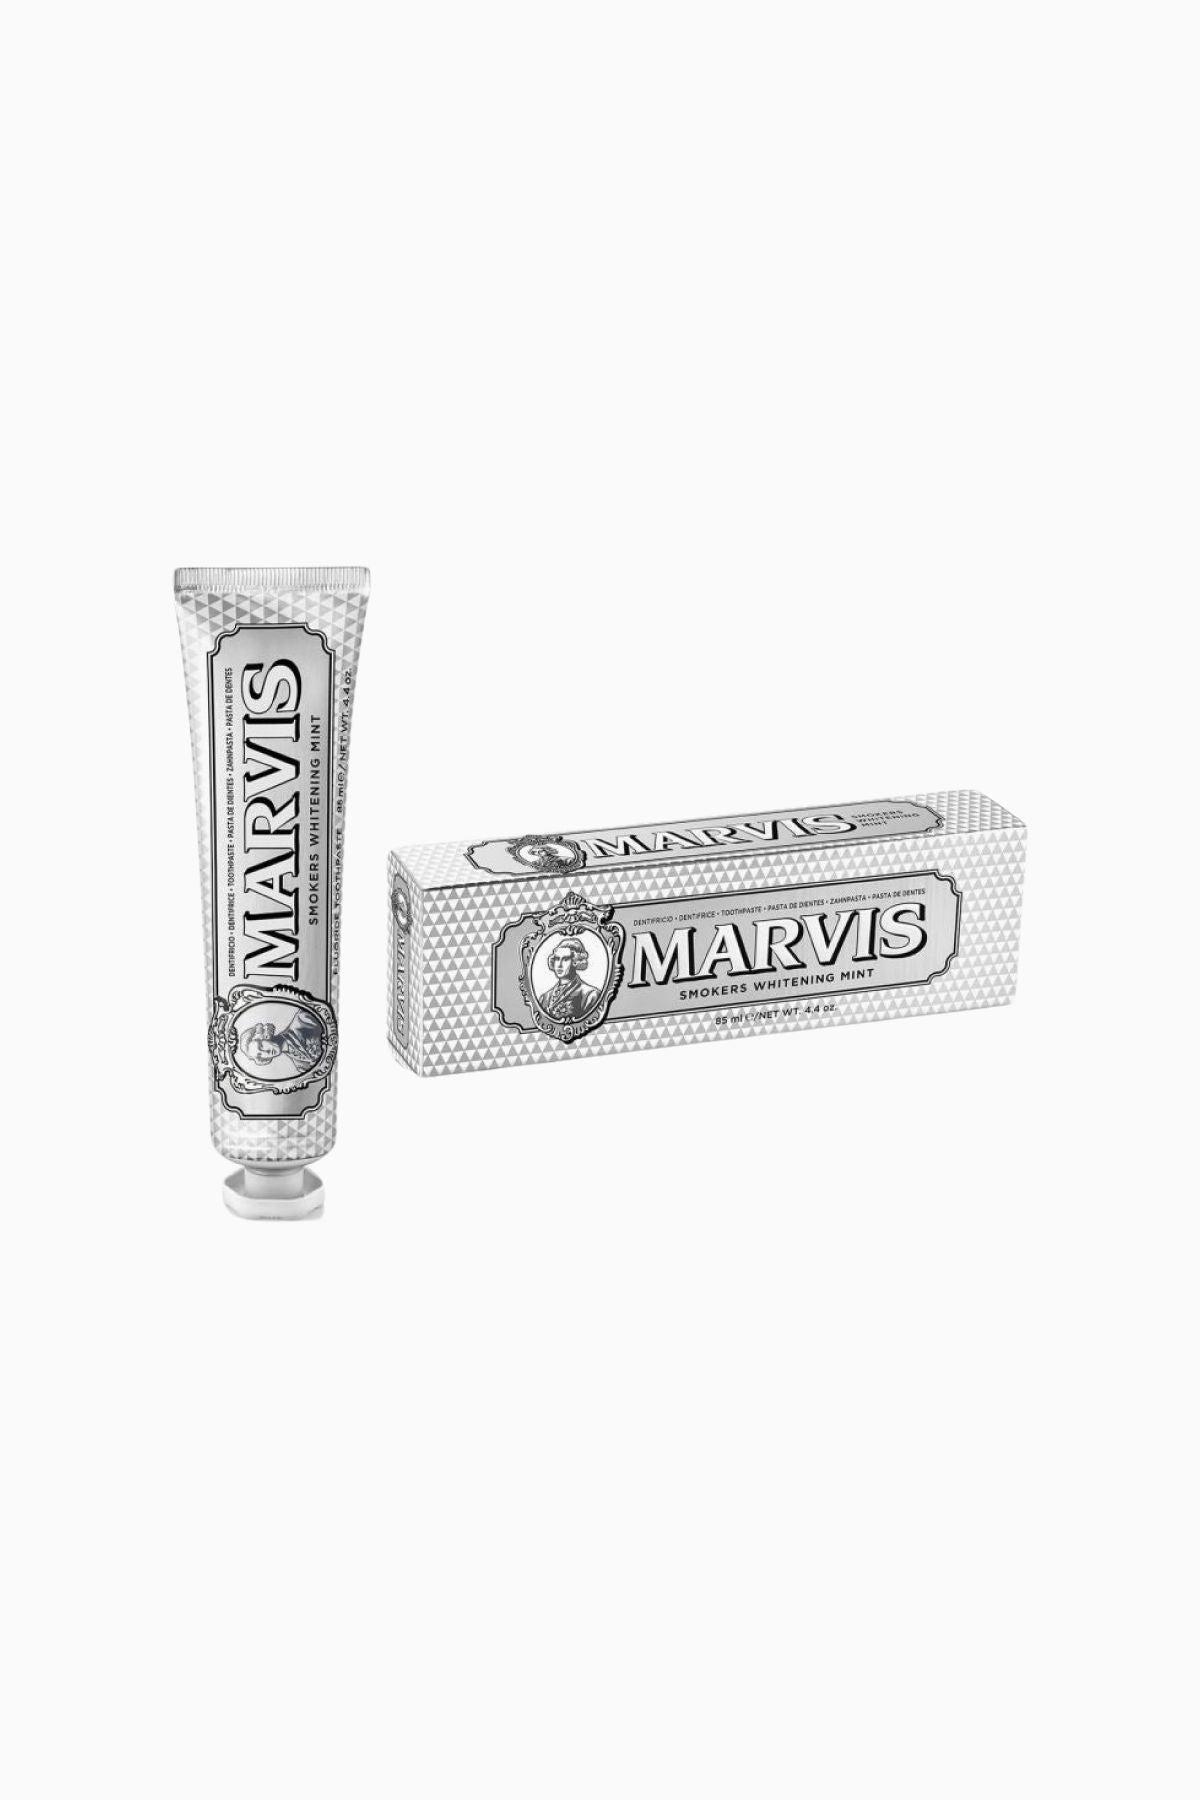 Marvis Toothpaste - Smokers Whitening Mint